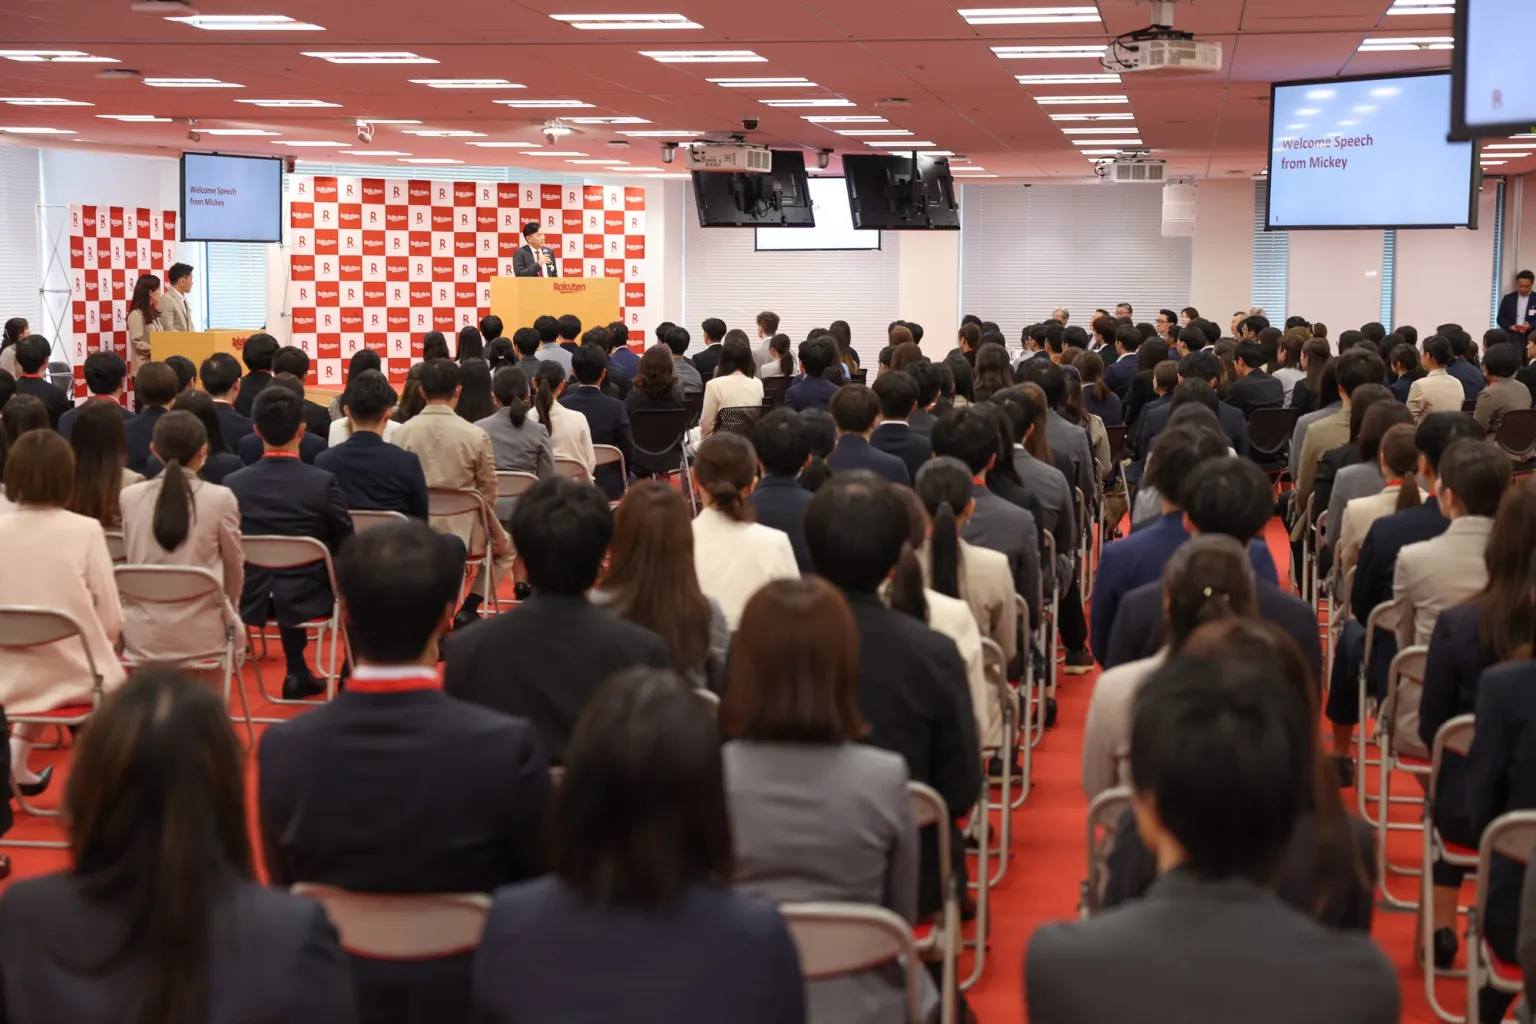 On April 1, Rakuten welcomed its new graduate employees at ts global headquarters in Tokyo, where Rakuten Group CEO Mickey Mikitani greeted them personally.